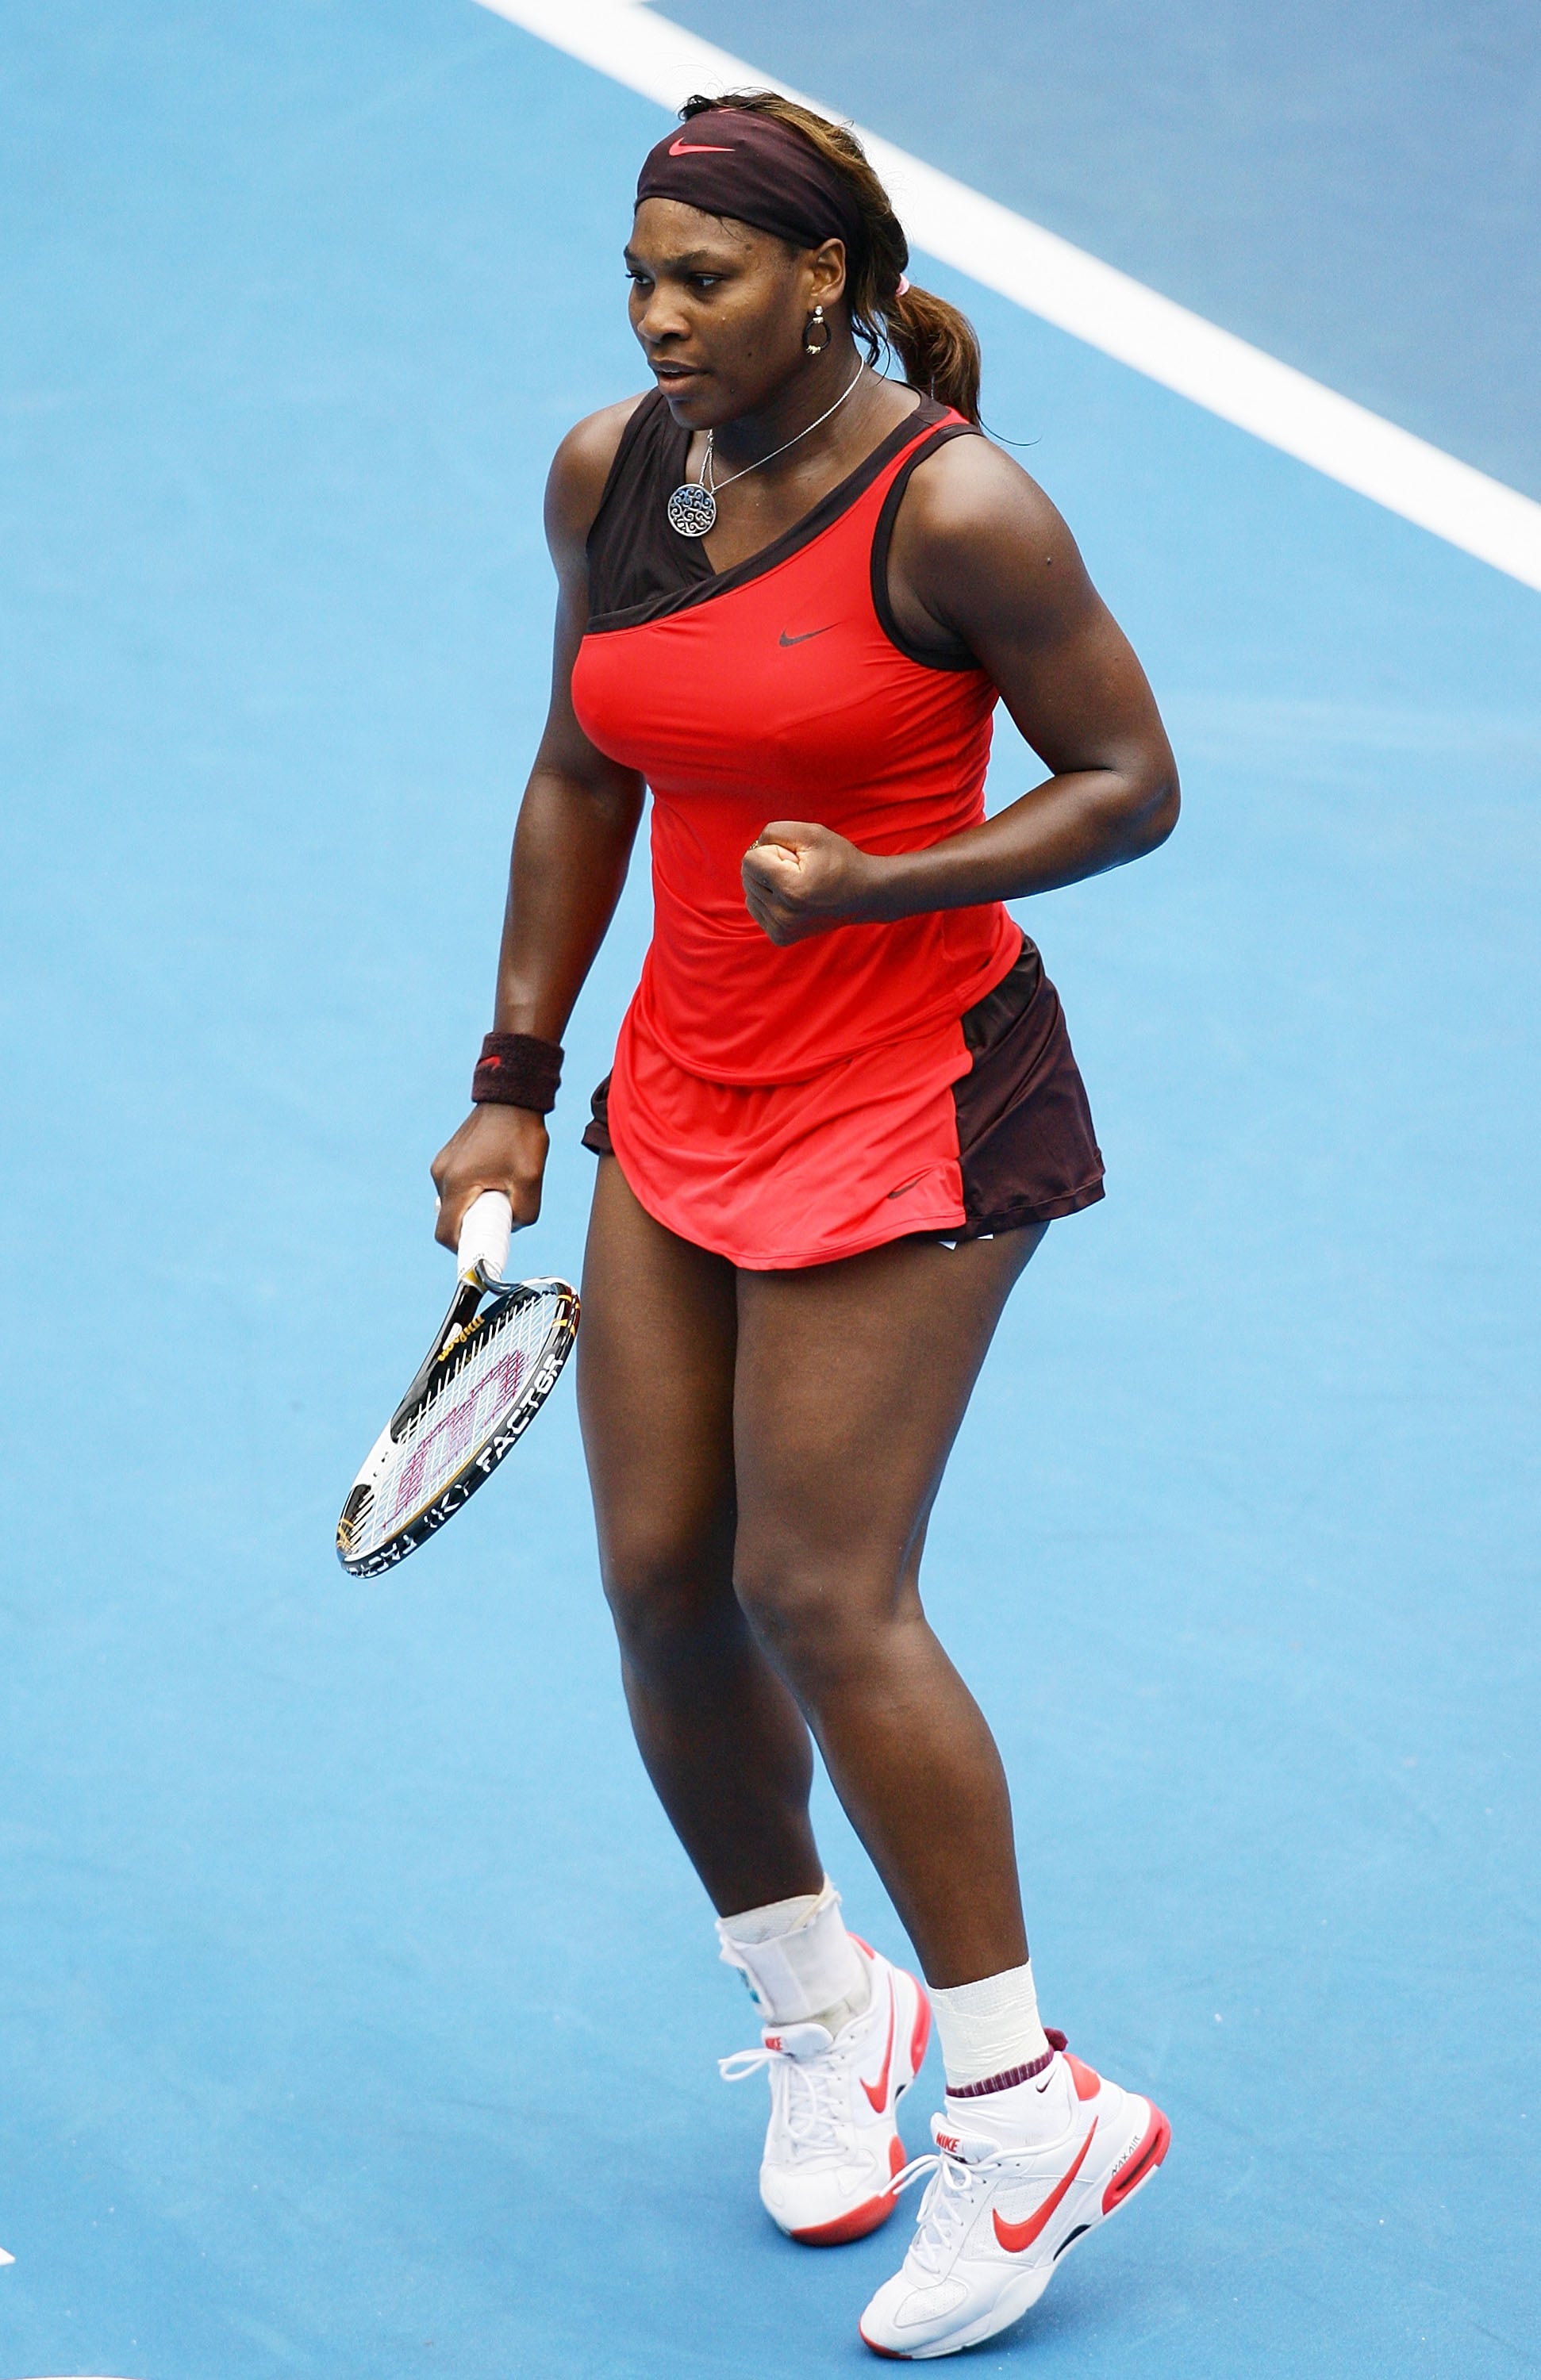 Serena Williams Wearing a Red Swoop Dress at the Medibank International in 2010 | The Coolest Darn Outfits Serena Williams Has Ever Worn on the Tennis Court | POPSUGAR Fashion 11